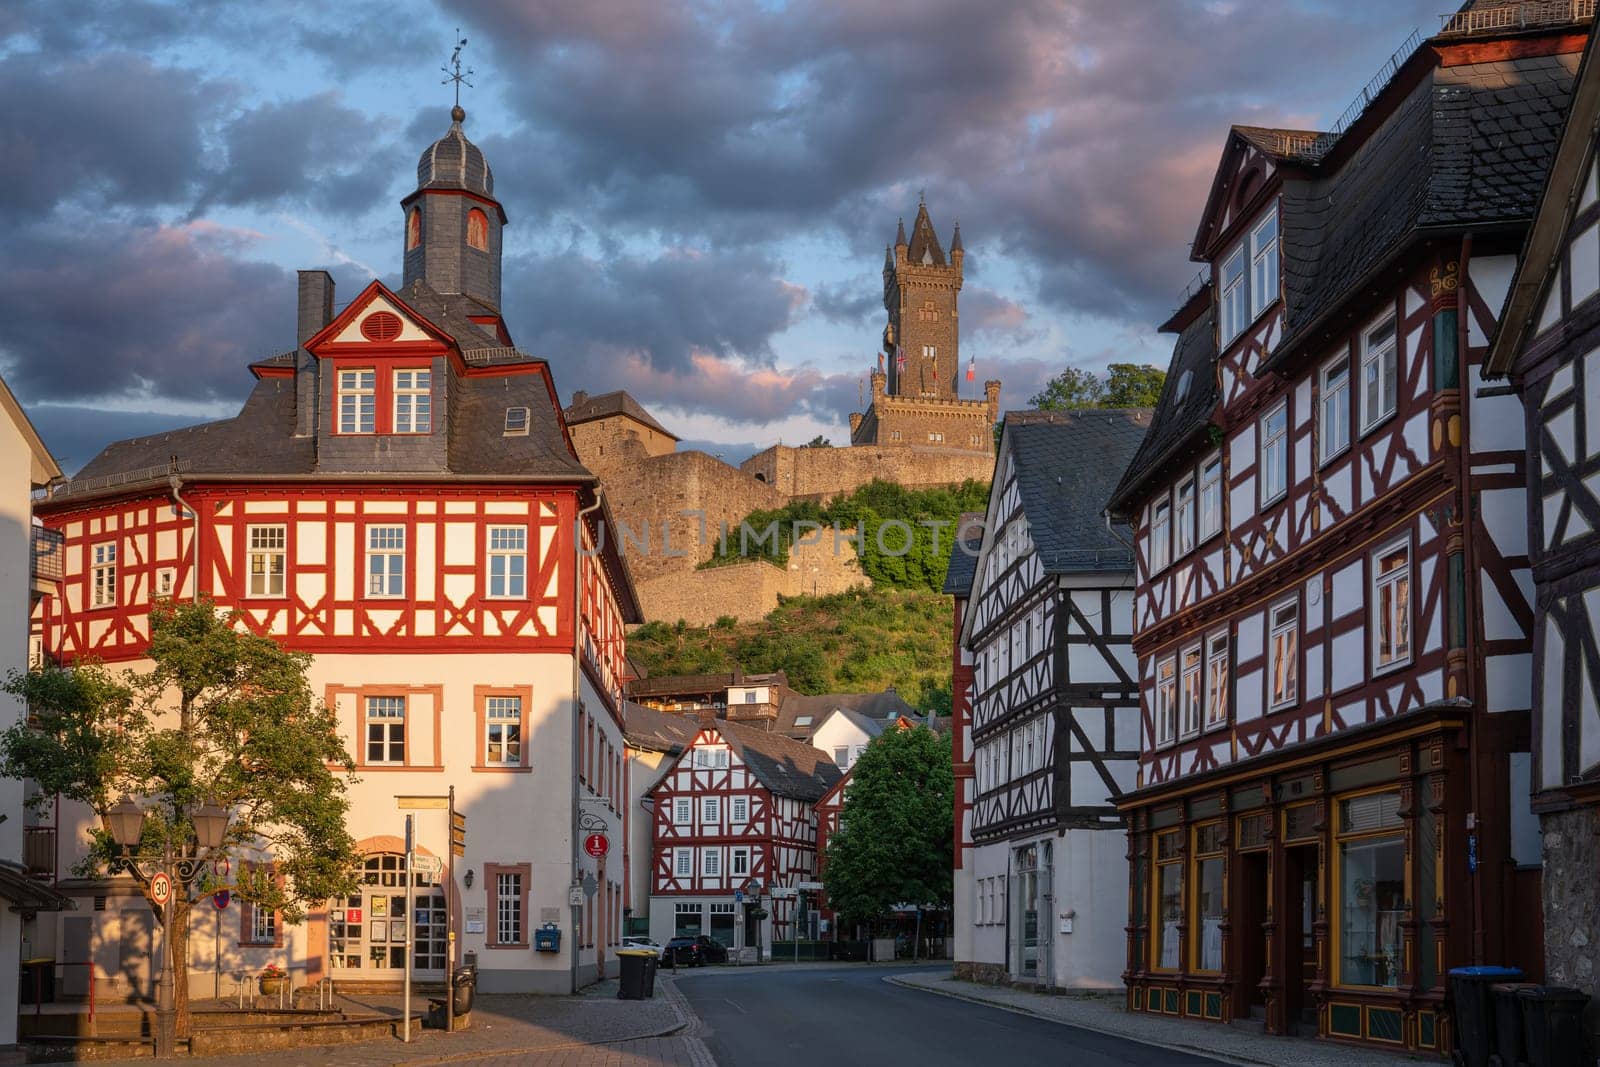 DILLENBURG, GERMANY - JUNE 10, 2023: Historic castle and downtown of Dillenburg on June 10, 2023 in Hesse, Germany